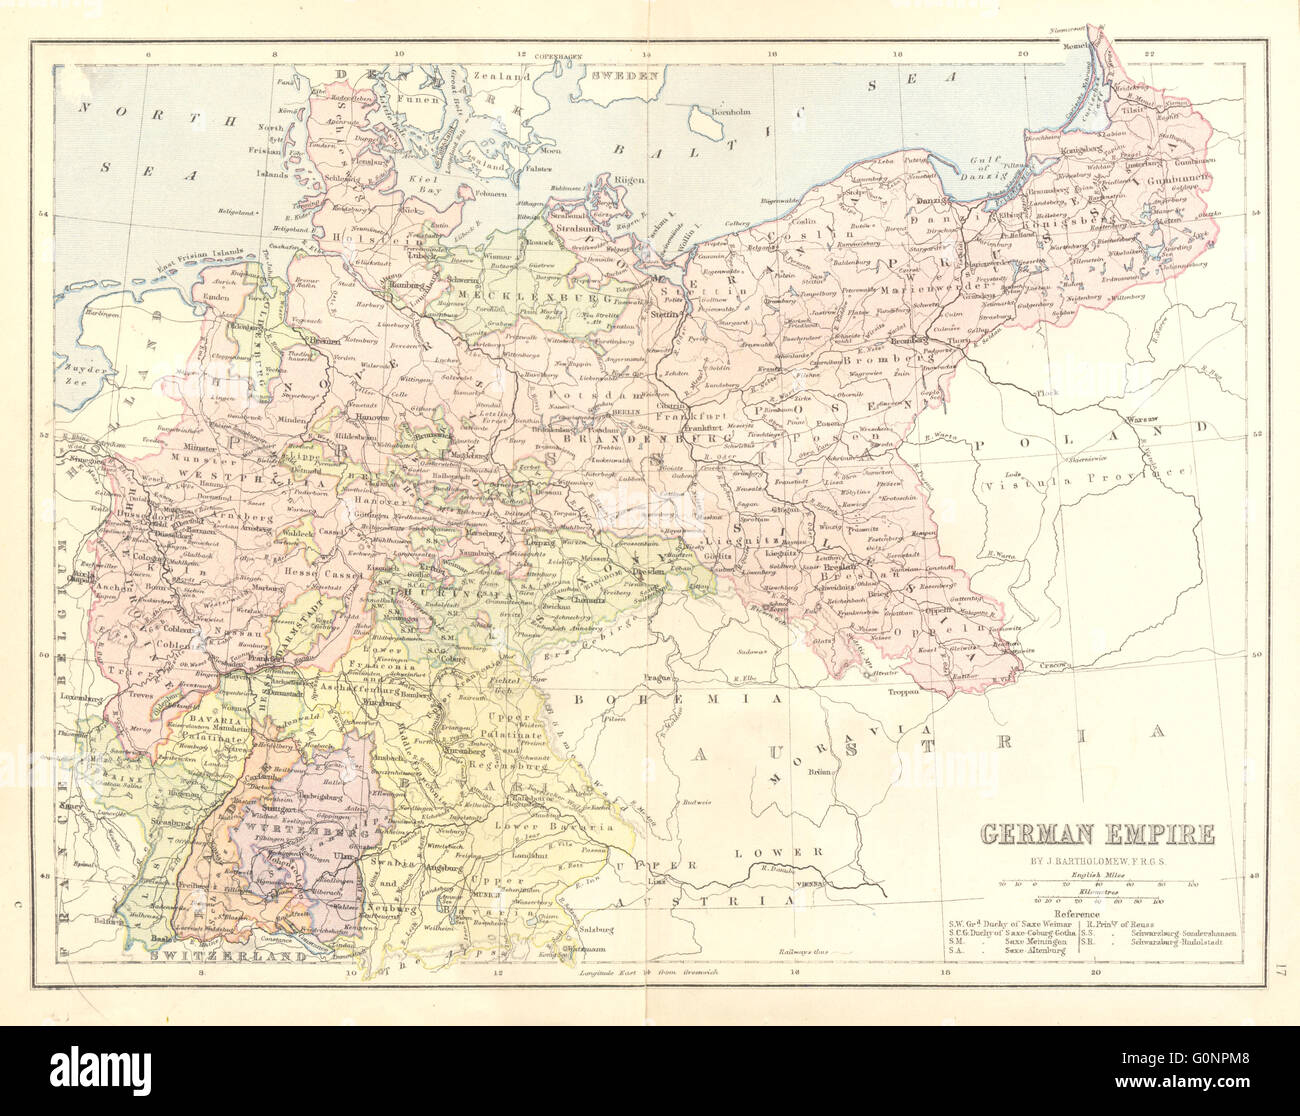 GERMANY: German Empire, 1870 antique map Stock Photo